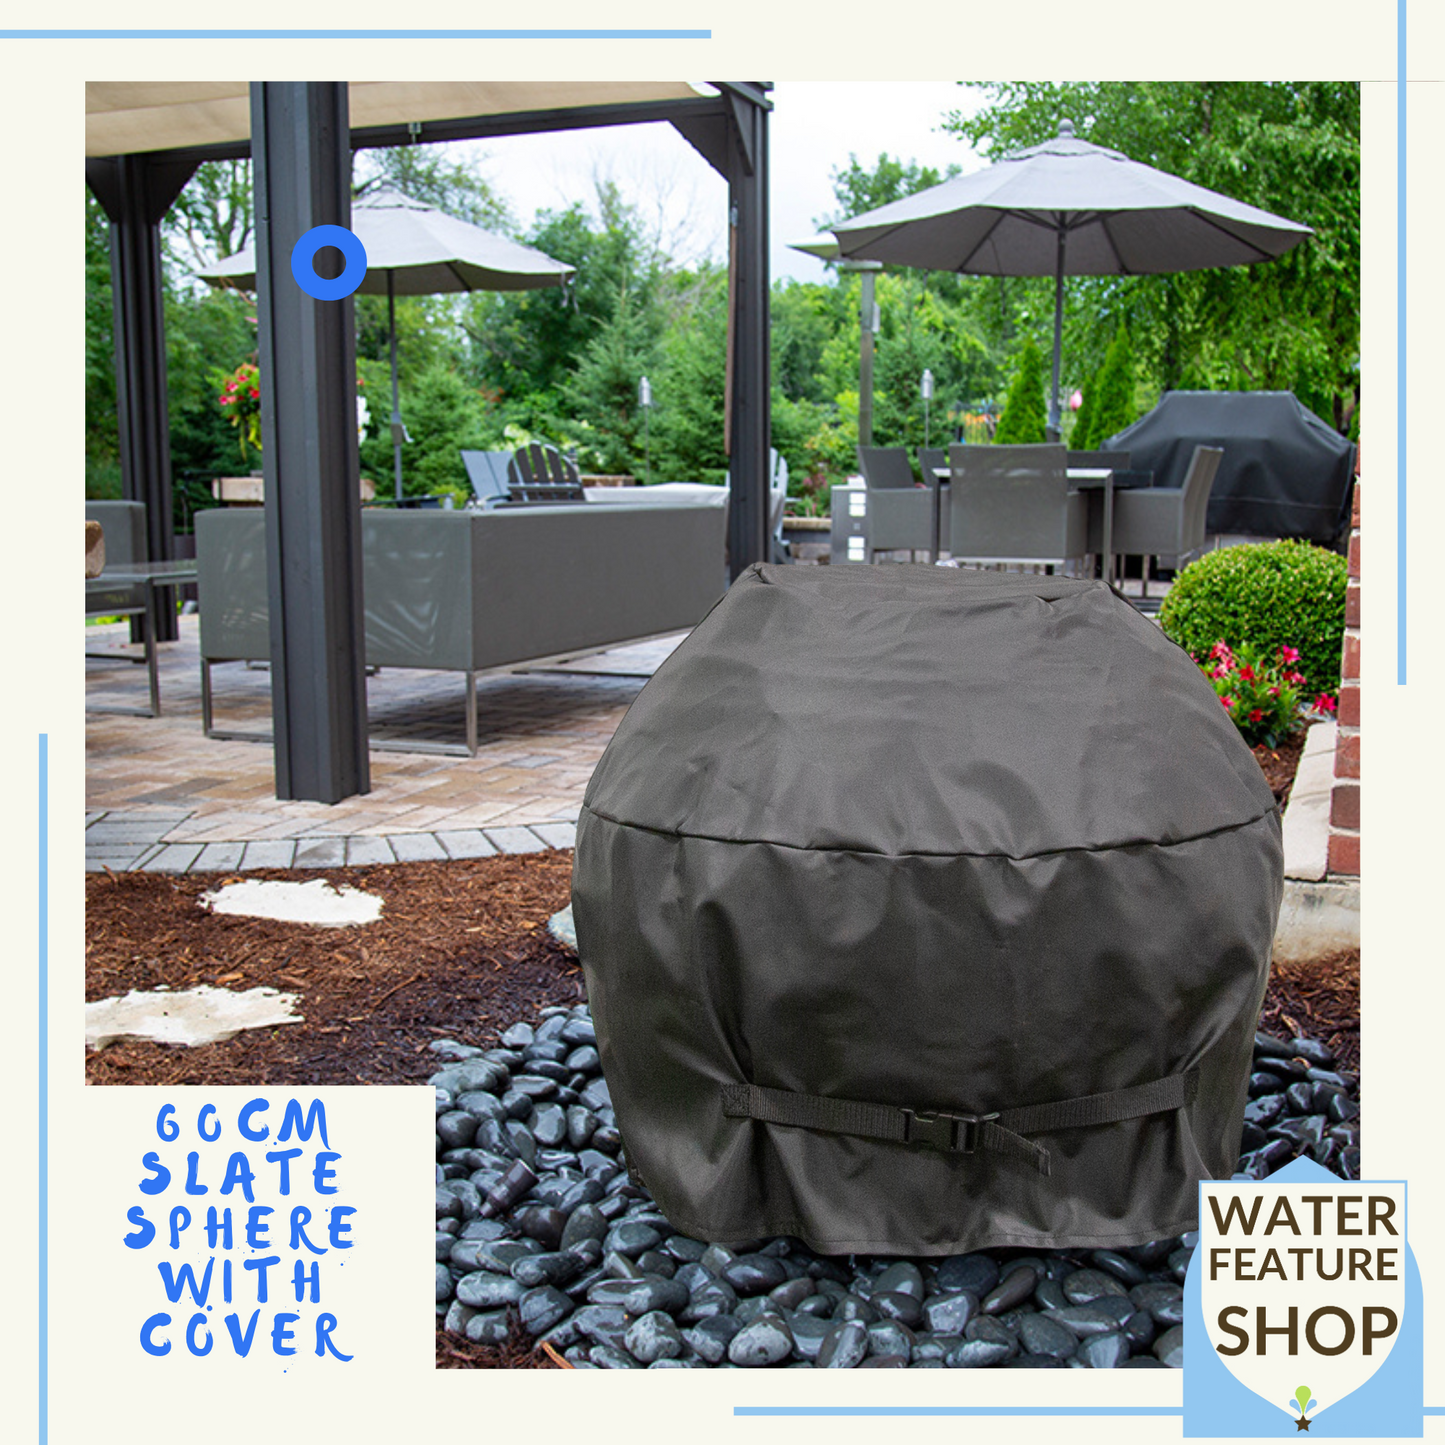 60cm Slate Sphere with Cover - Garden Water Feature